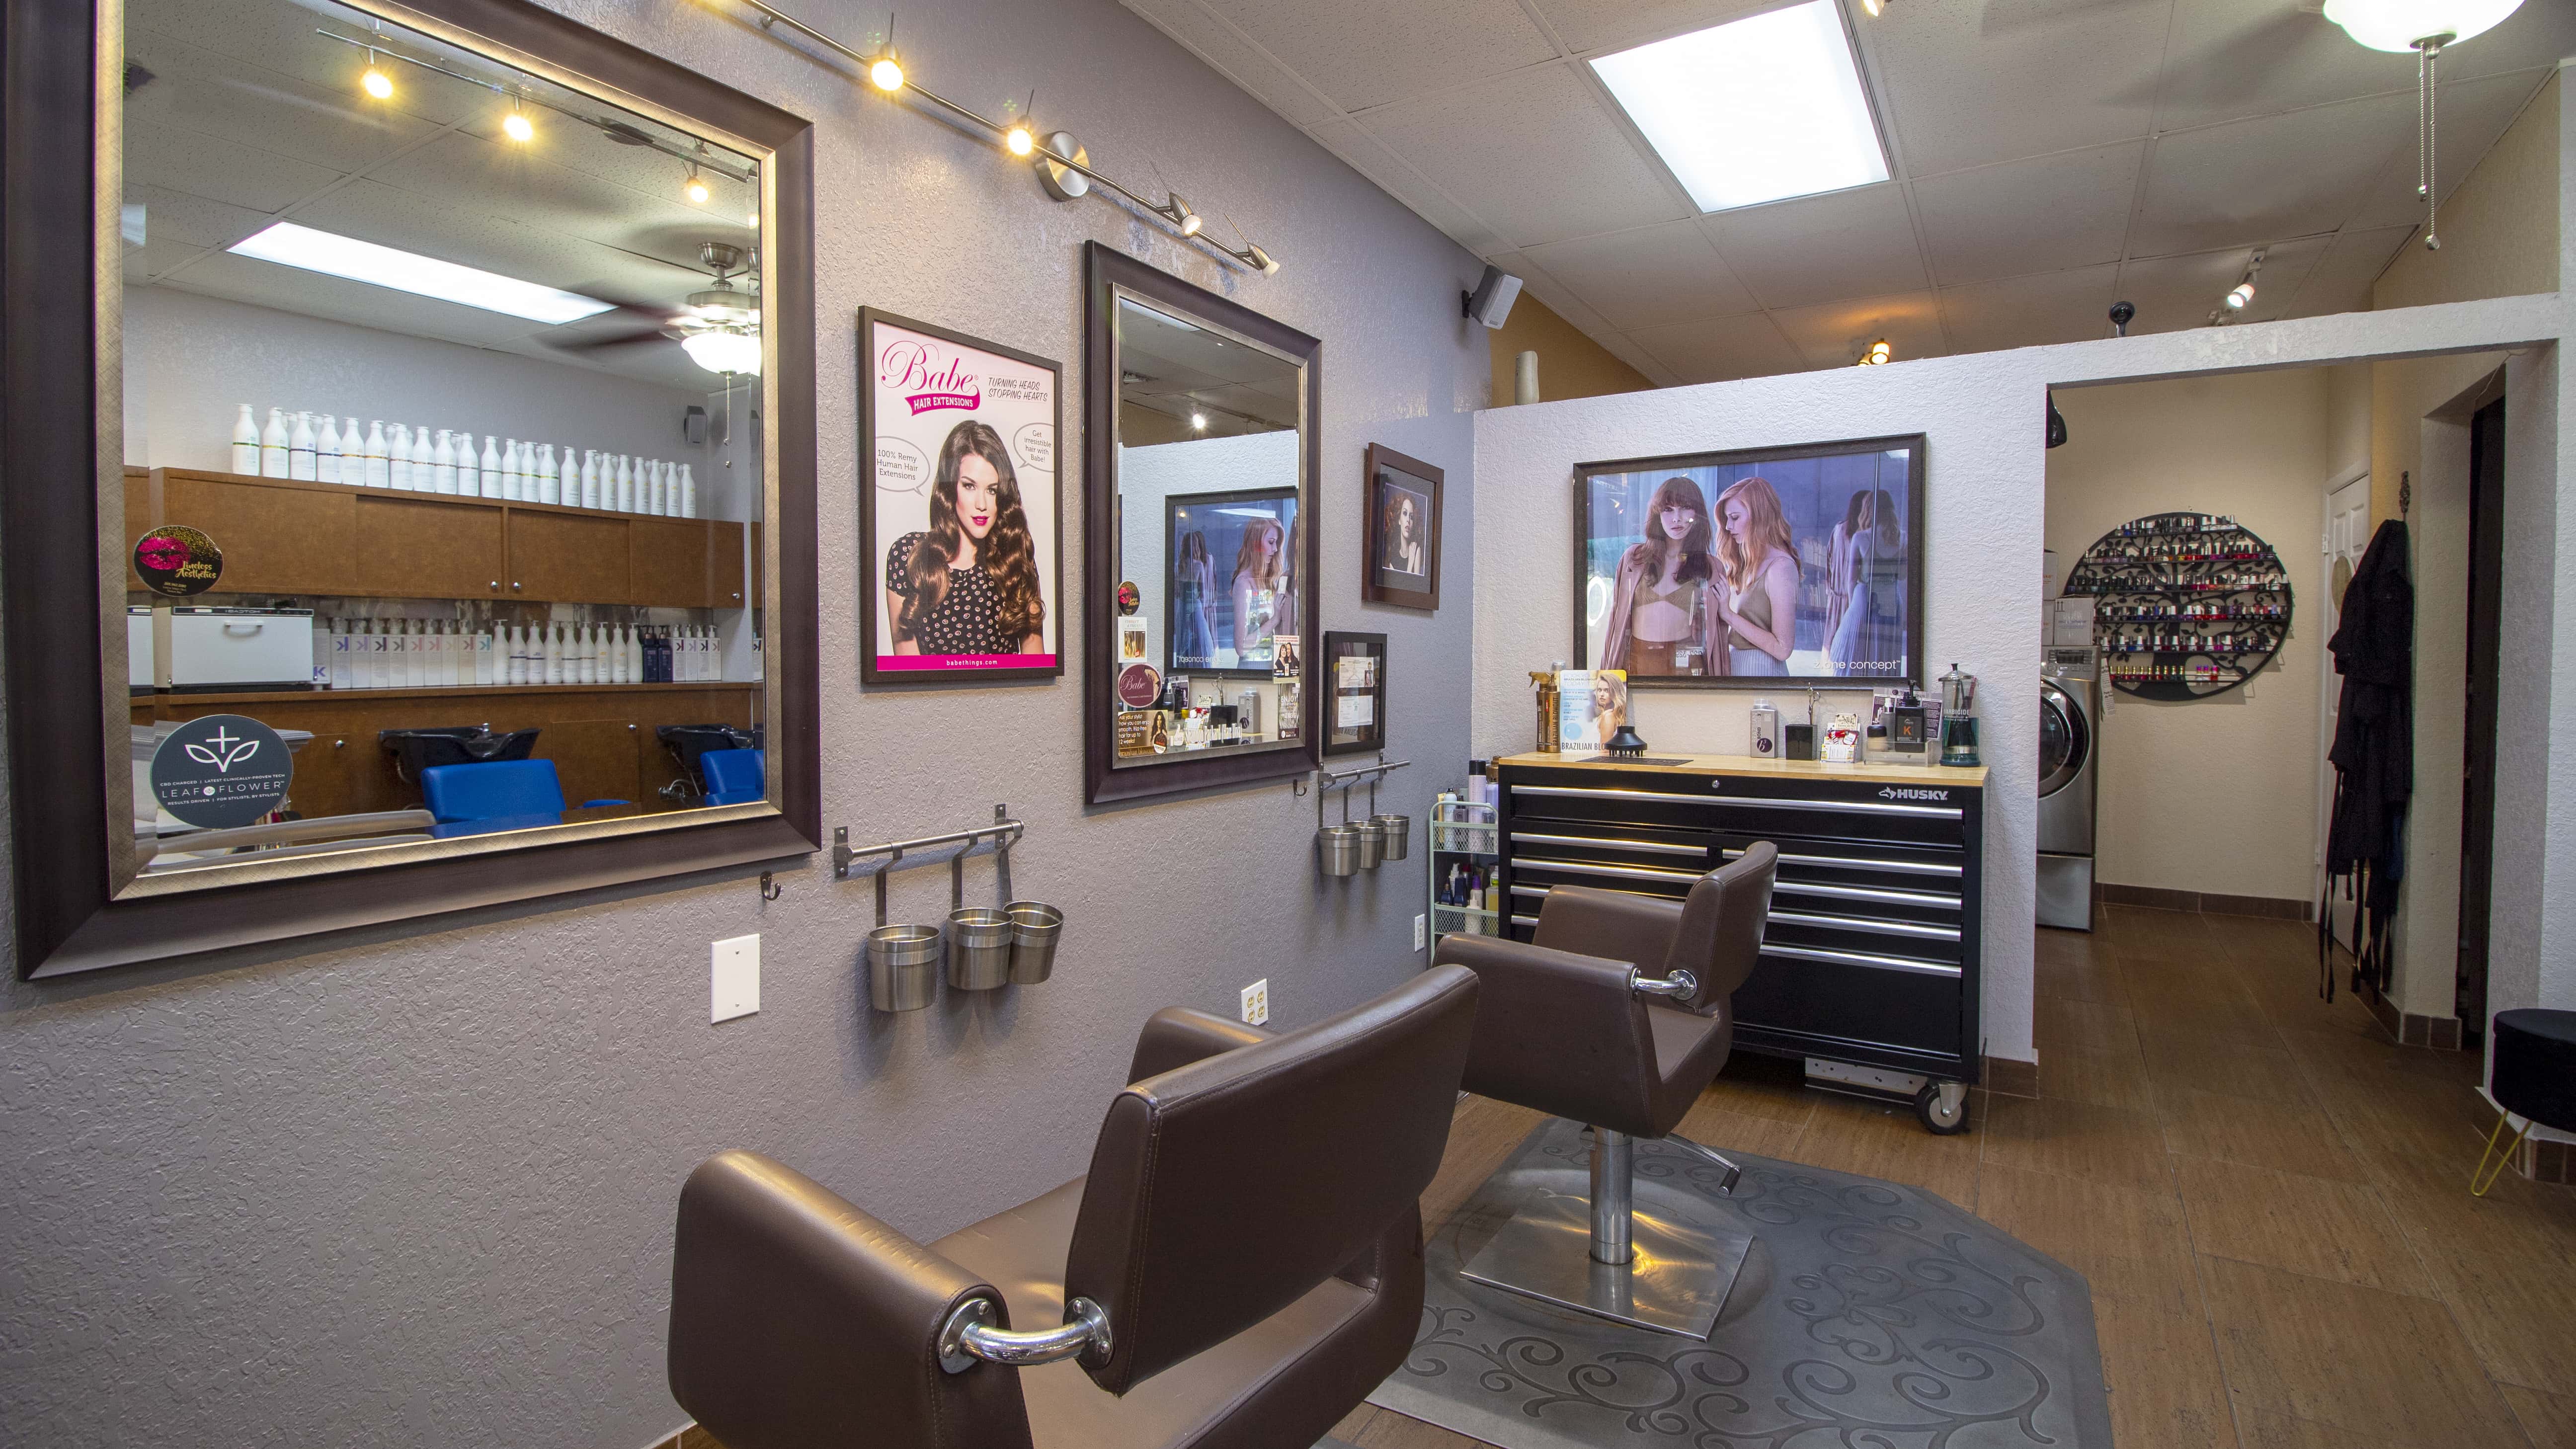 Truvy Salon and Spa - St. Petersburg, FL, US, long hairstyles